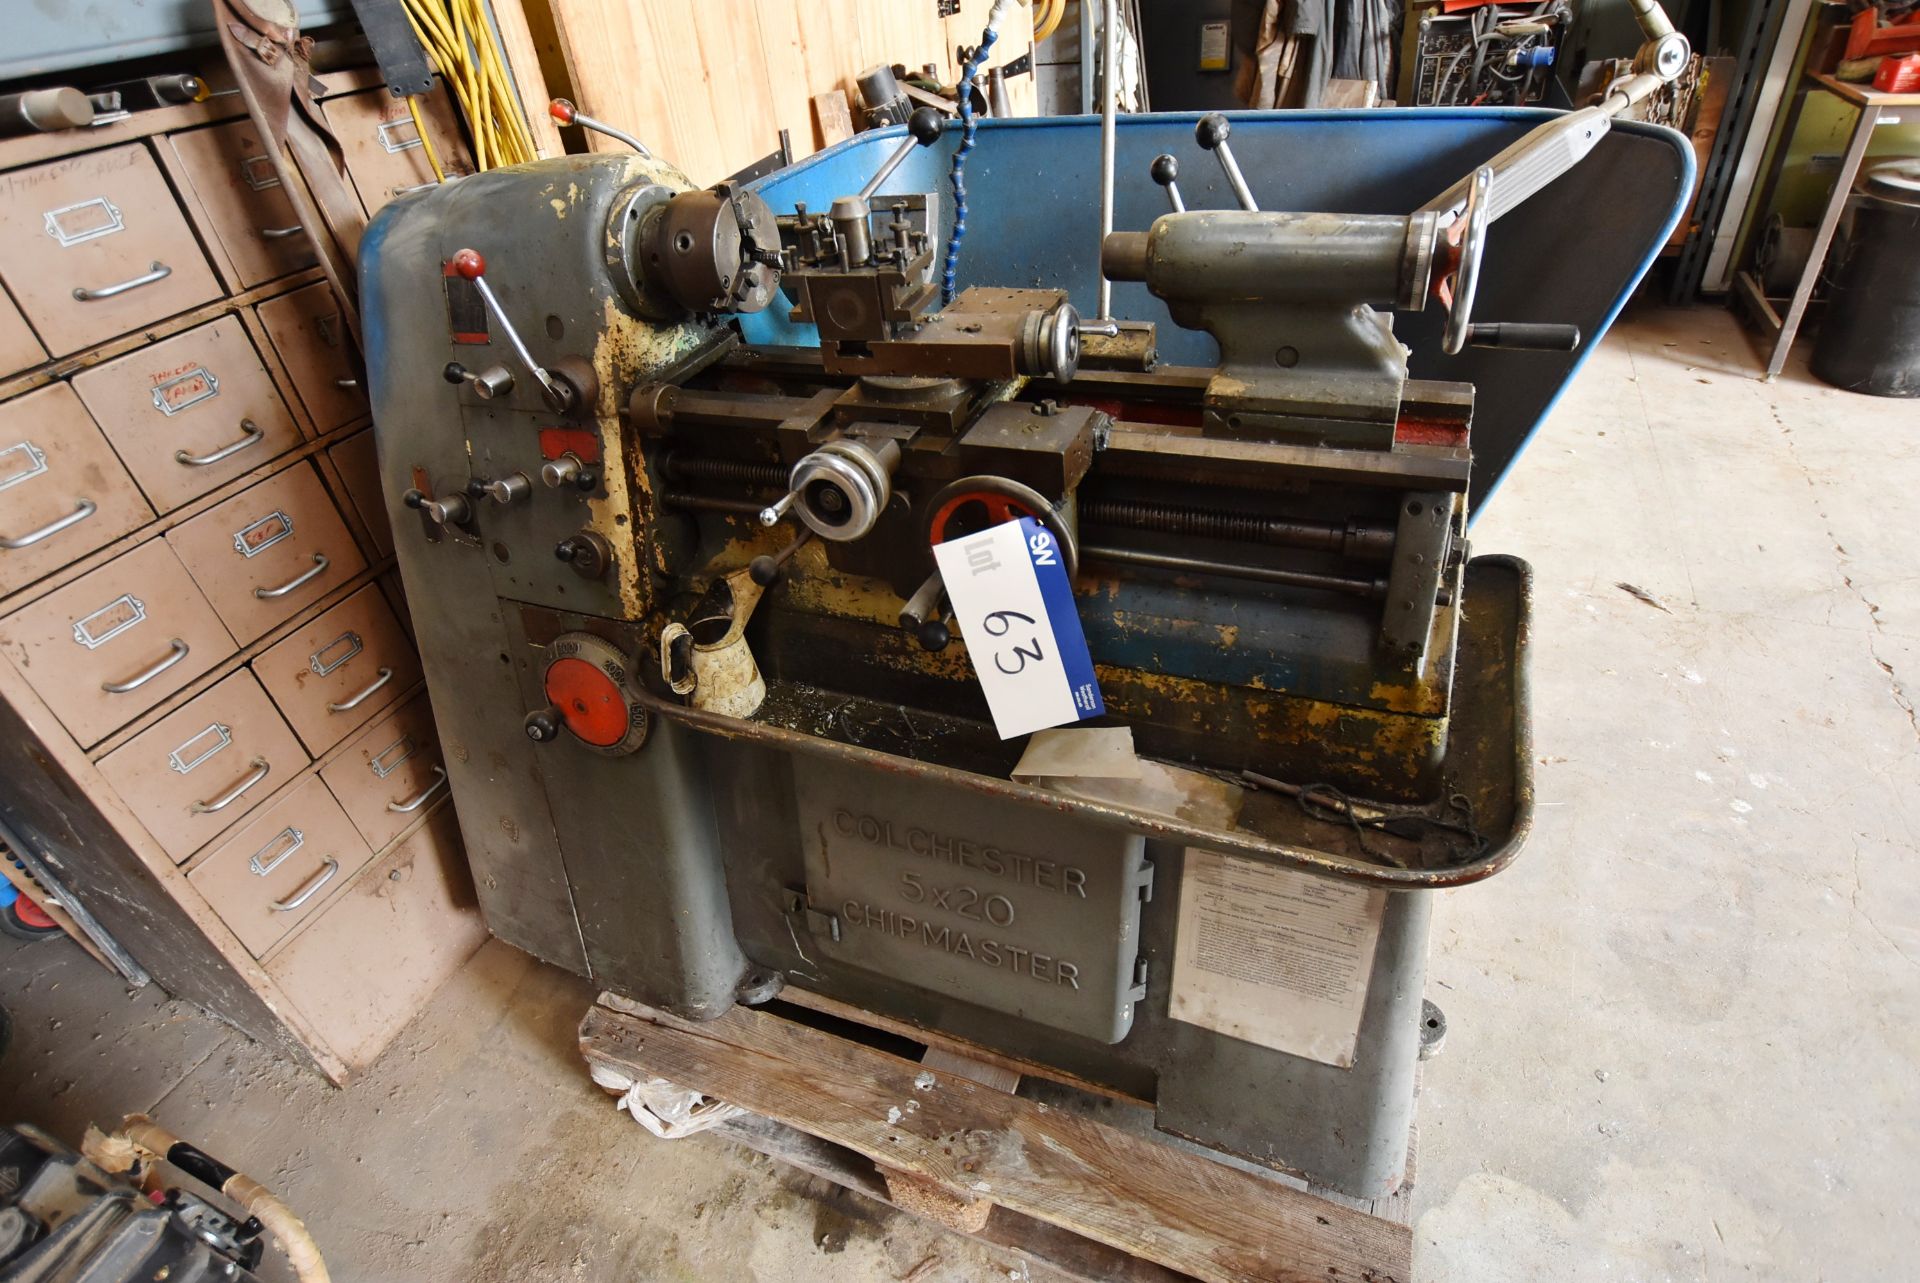 Colchester 5x20 CHIP MASTER CENTRE LATHE, approx. 850mm long on bed, with quick change tool post